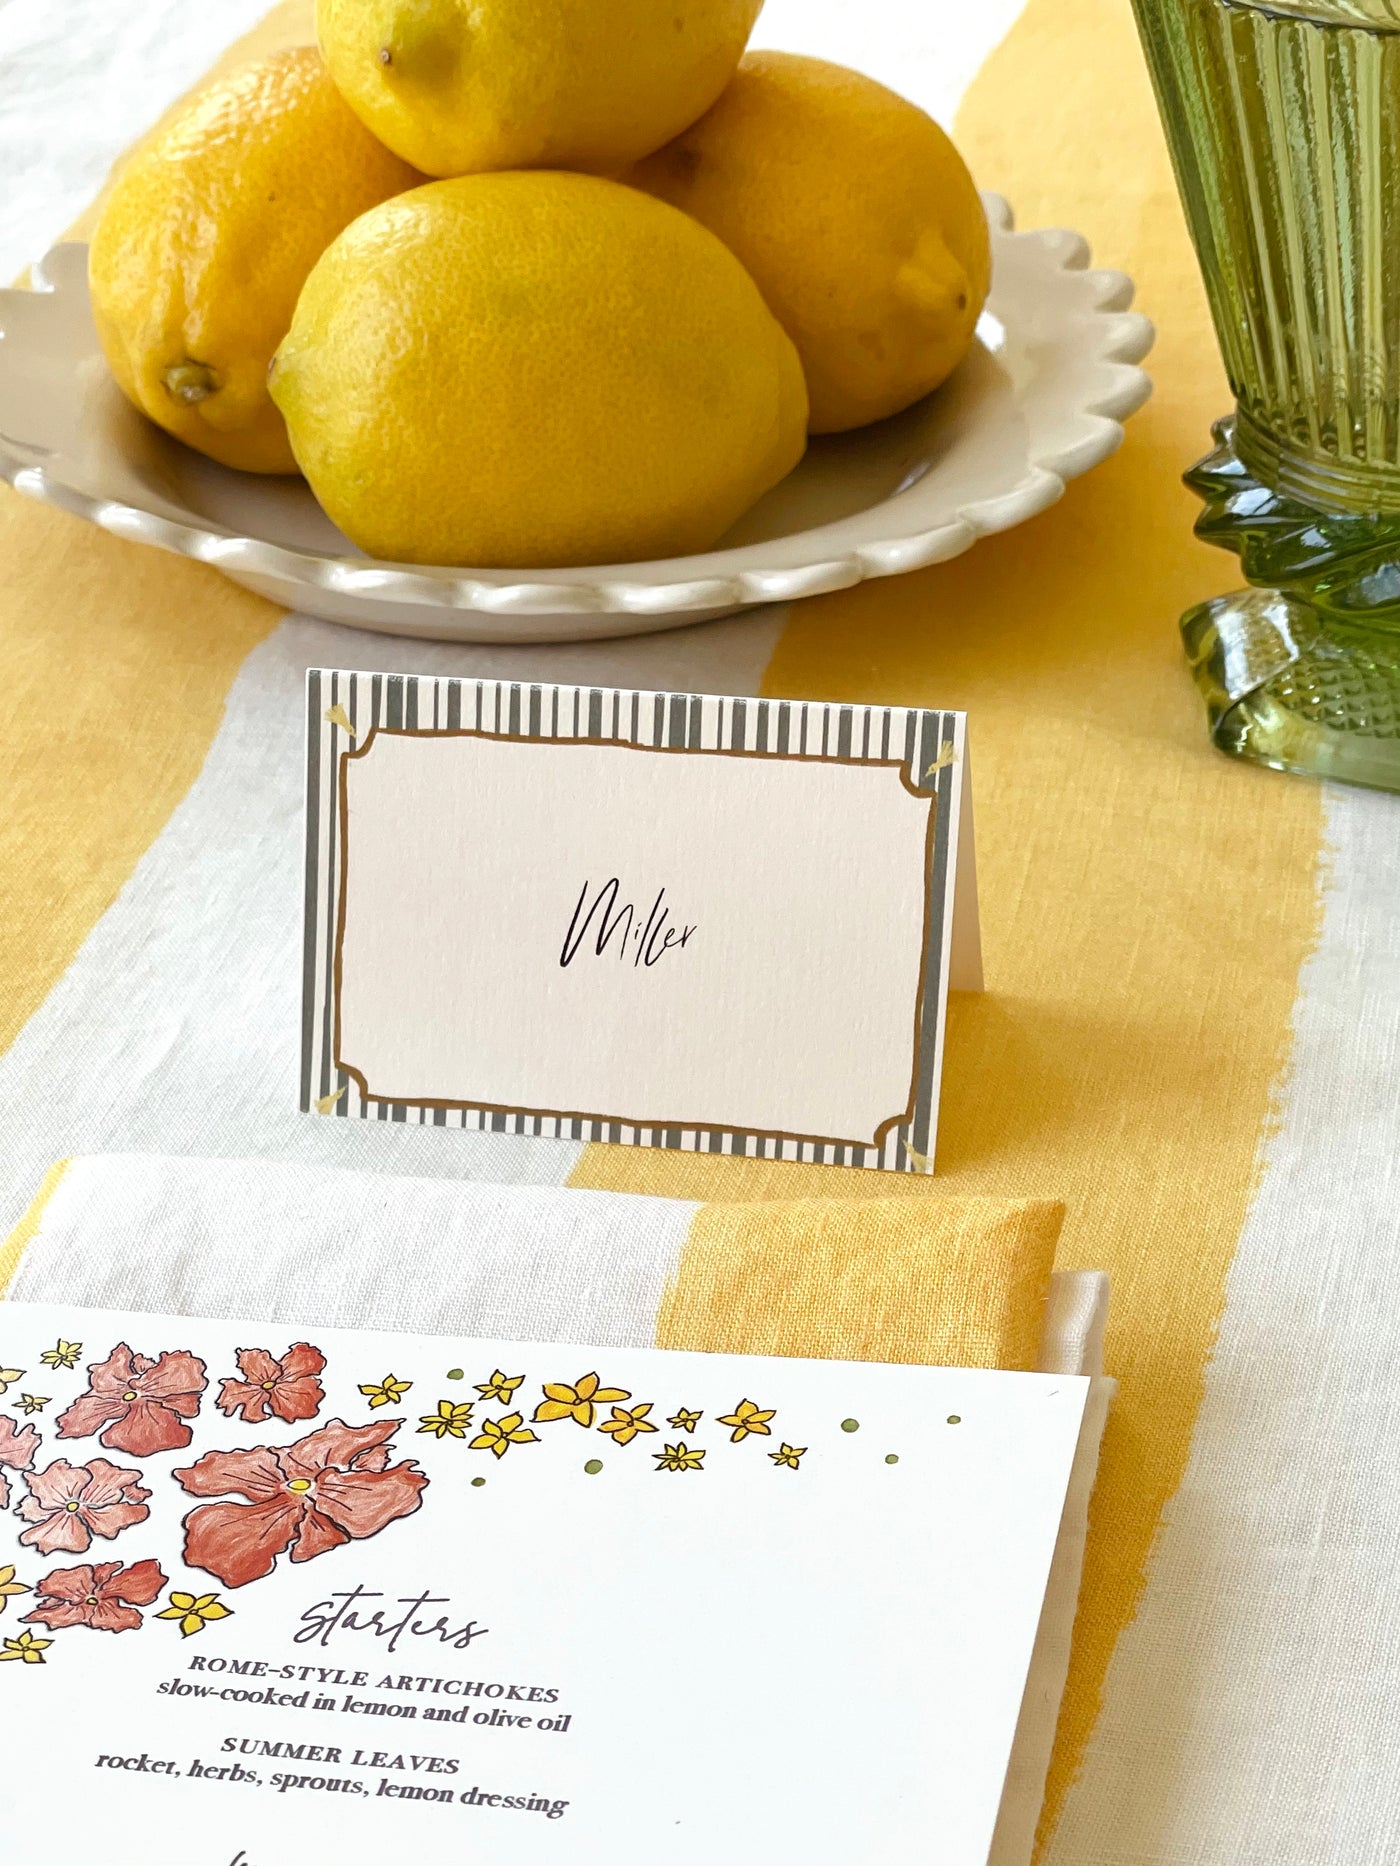 Top Table placecards